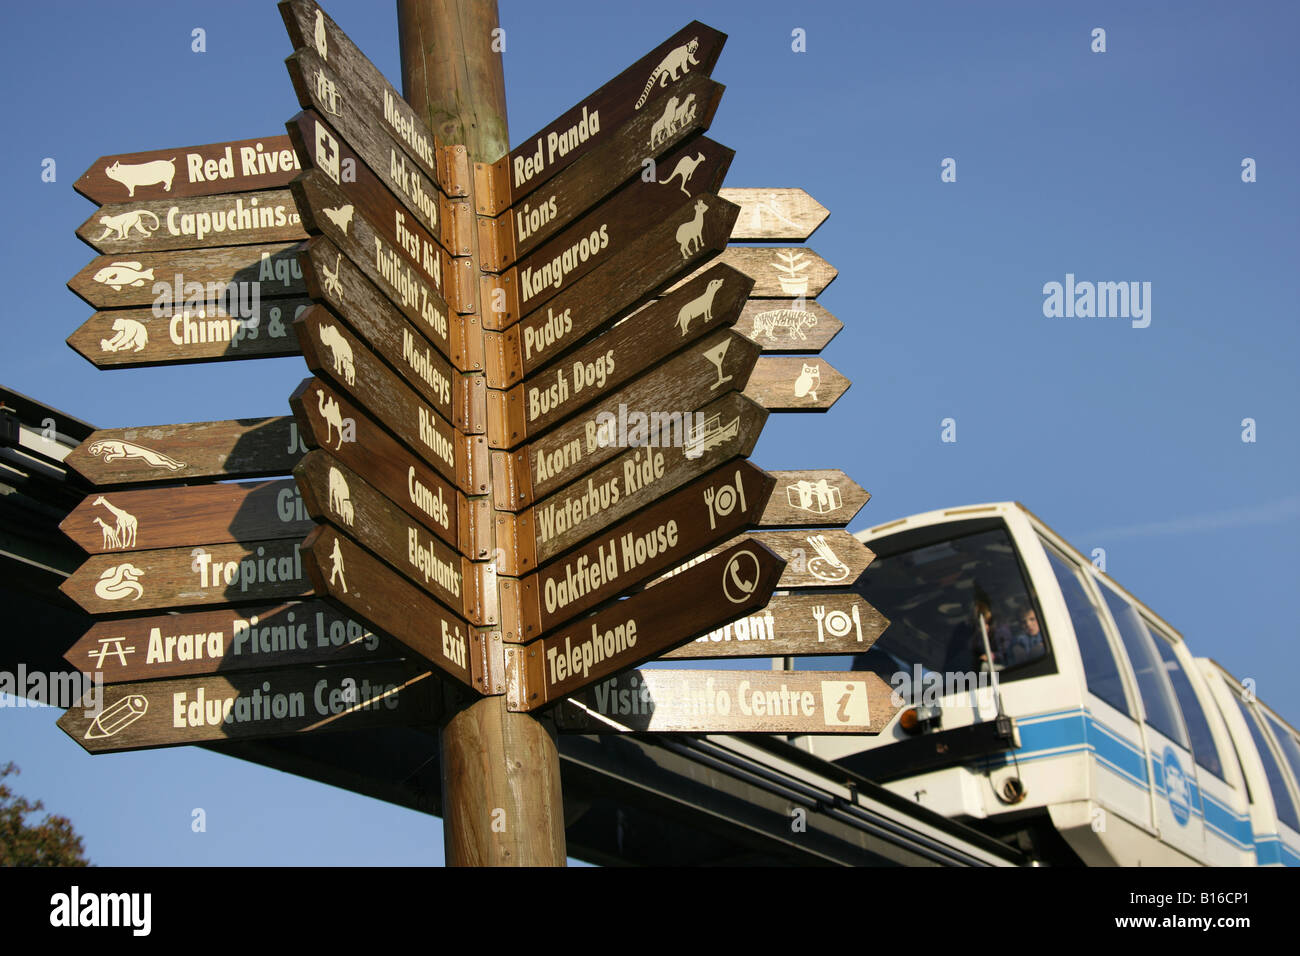 City of Chester, England. Chester Zoo visitor direction signs with the Zoo’s monorail in the background. Stock Photo